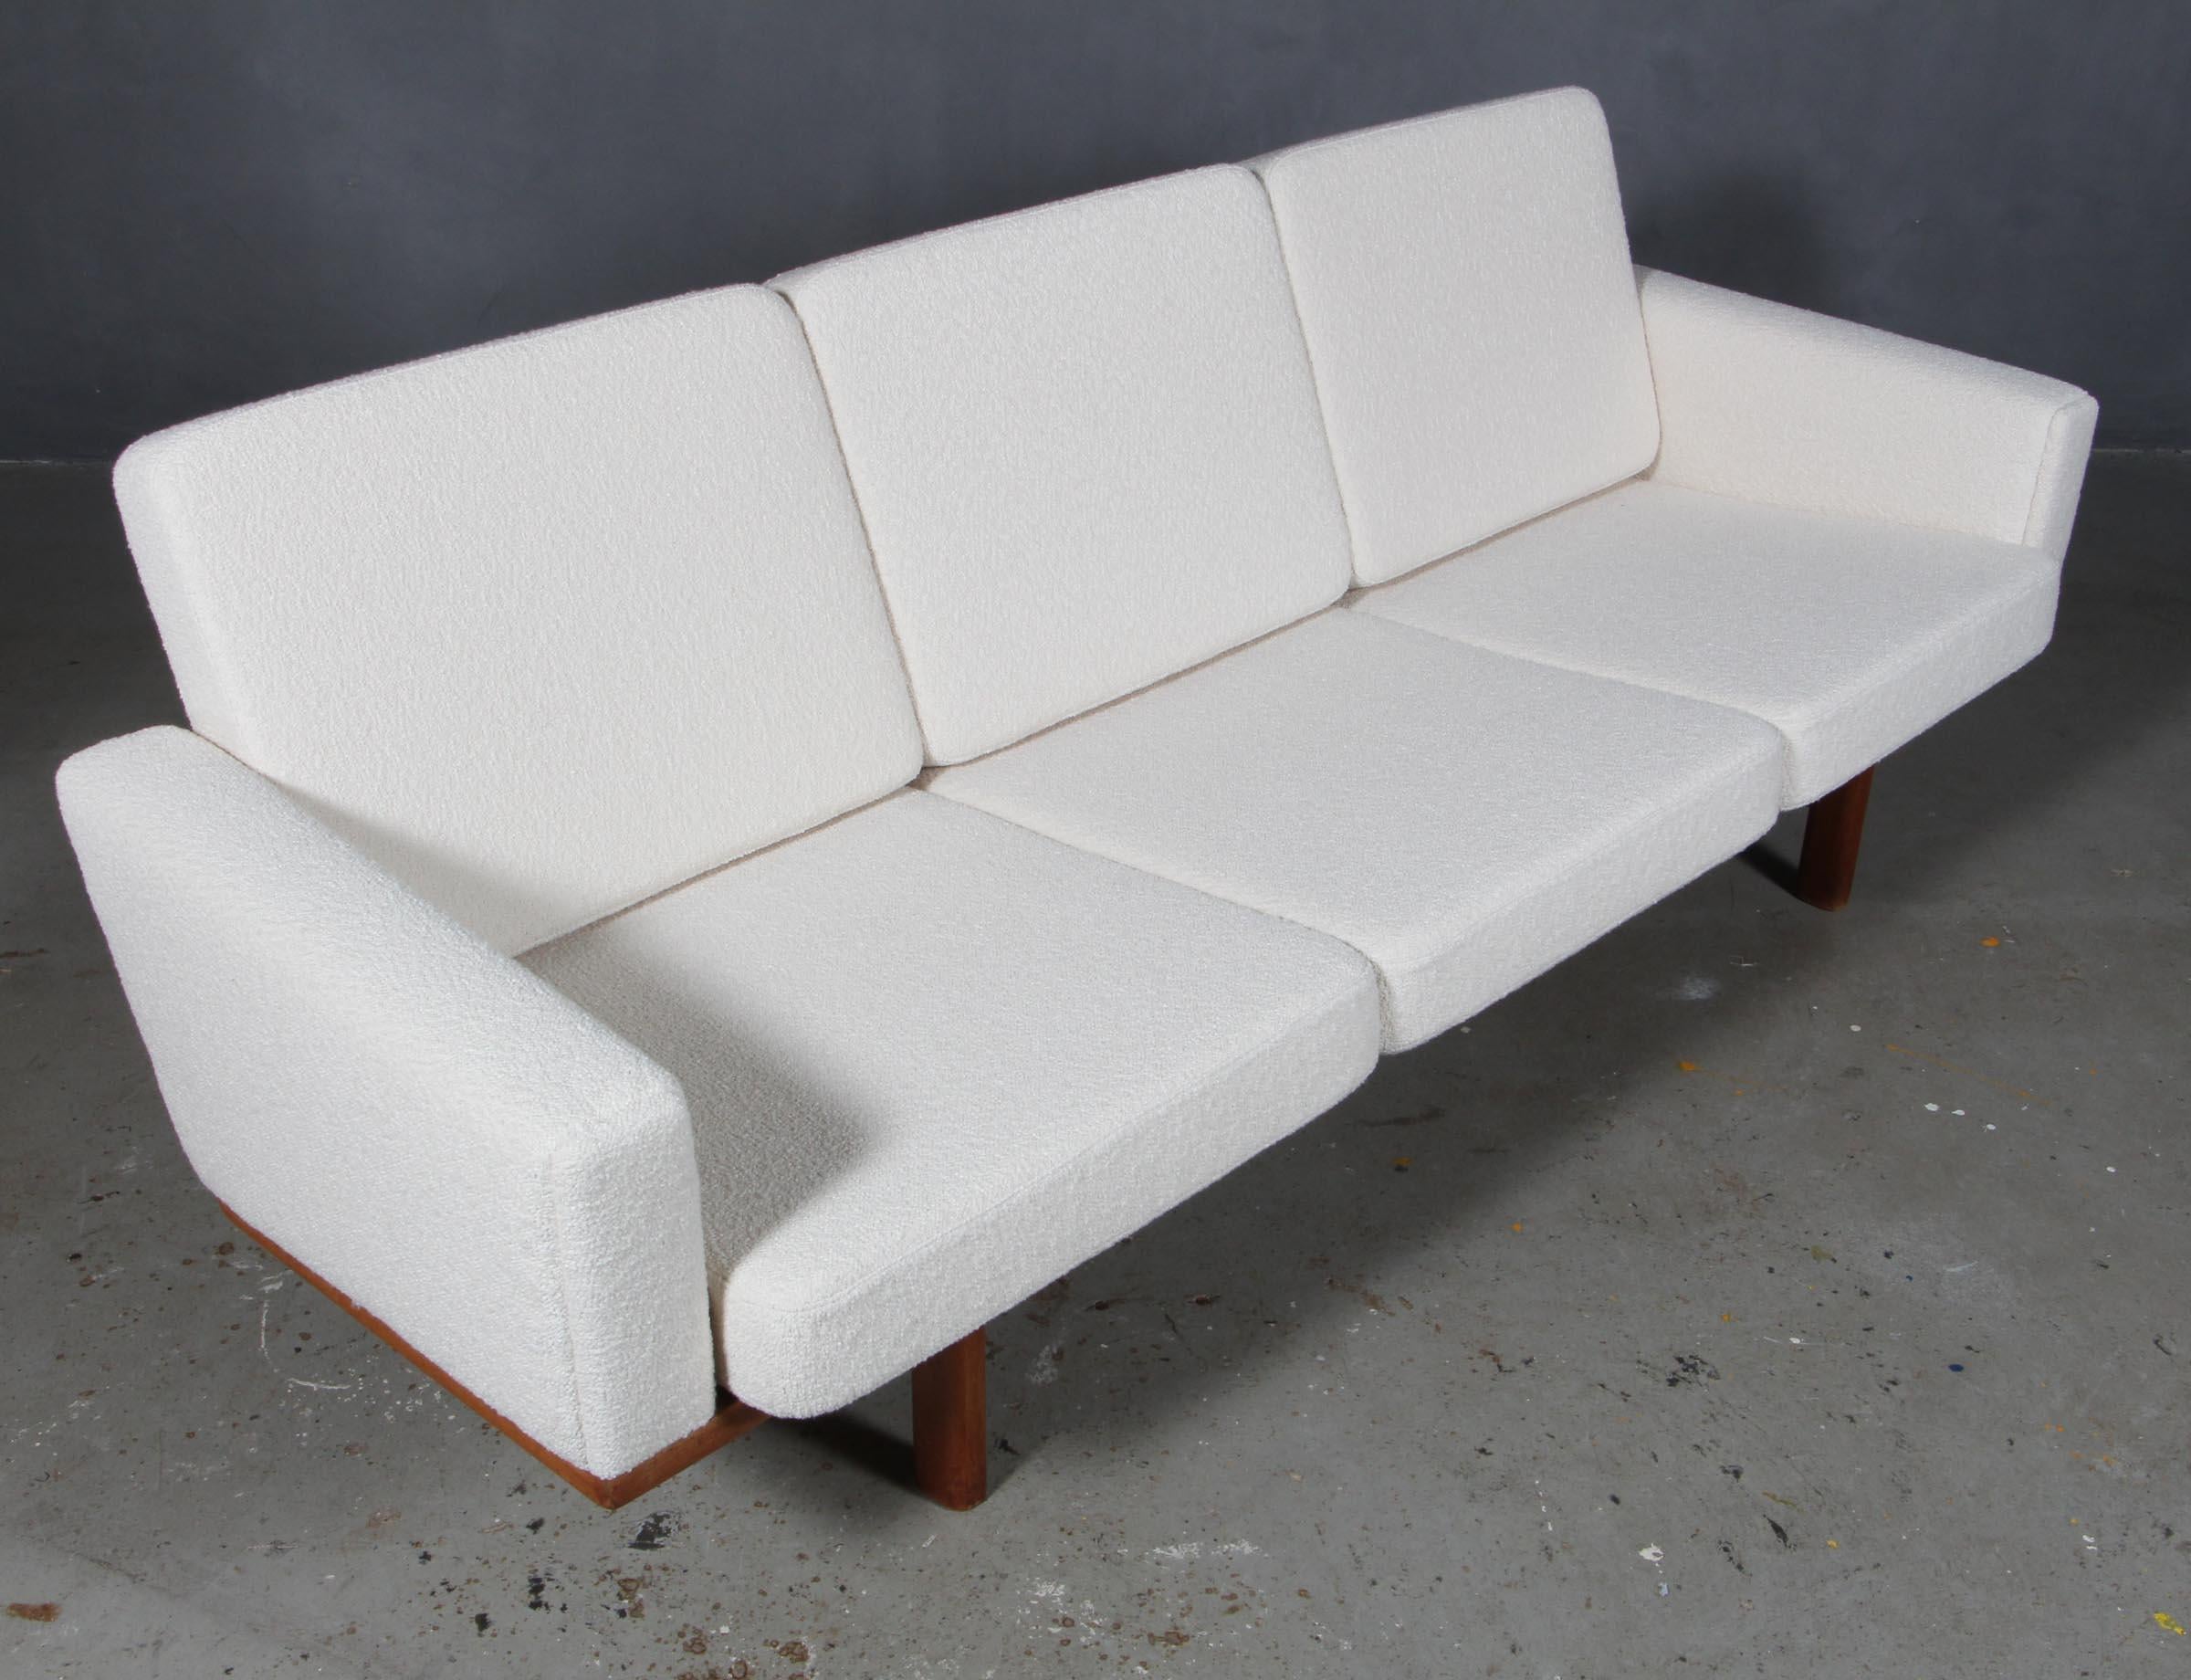 Hans J. Wegner three-seat sofa new upholstered with Boucle.

Frame in solid oak.

Model 236/3, produced by GETAMA.